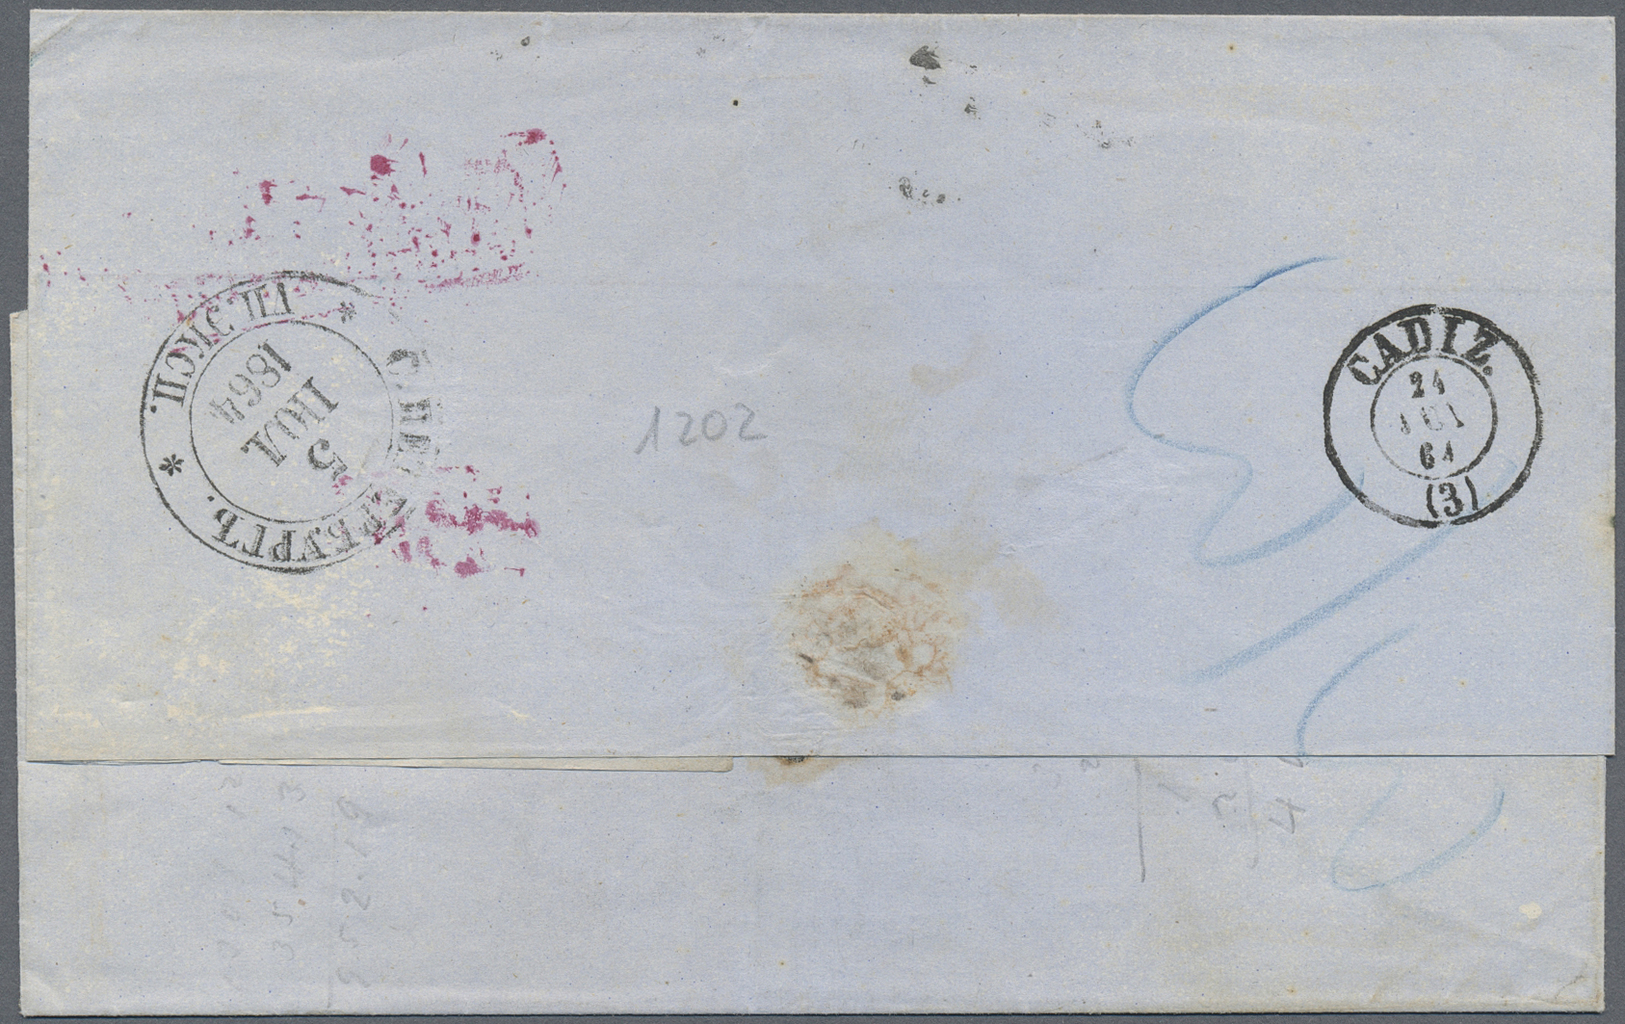 Br Russland: 1864. Stampless Envelope Written From St. Petersburg Dated 'July 4th 1864' Addressed To Cadiz With D - Neufs